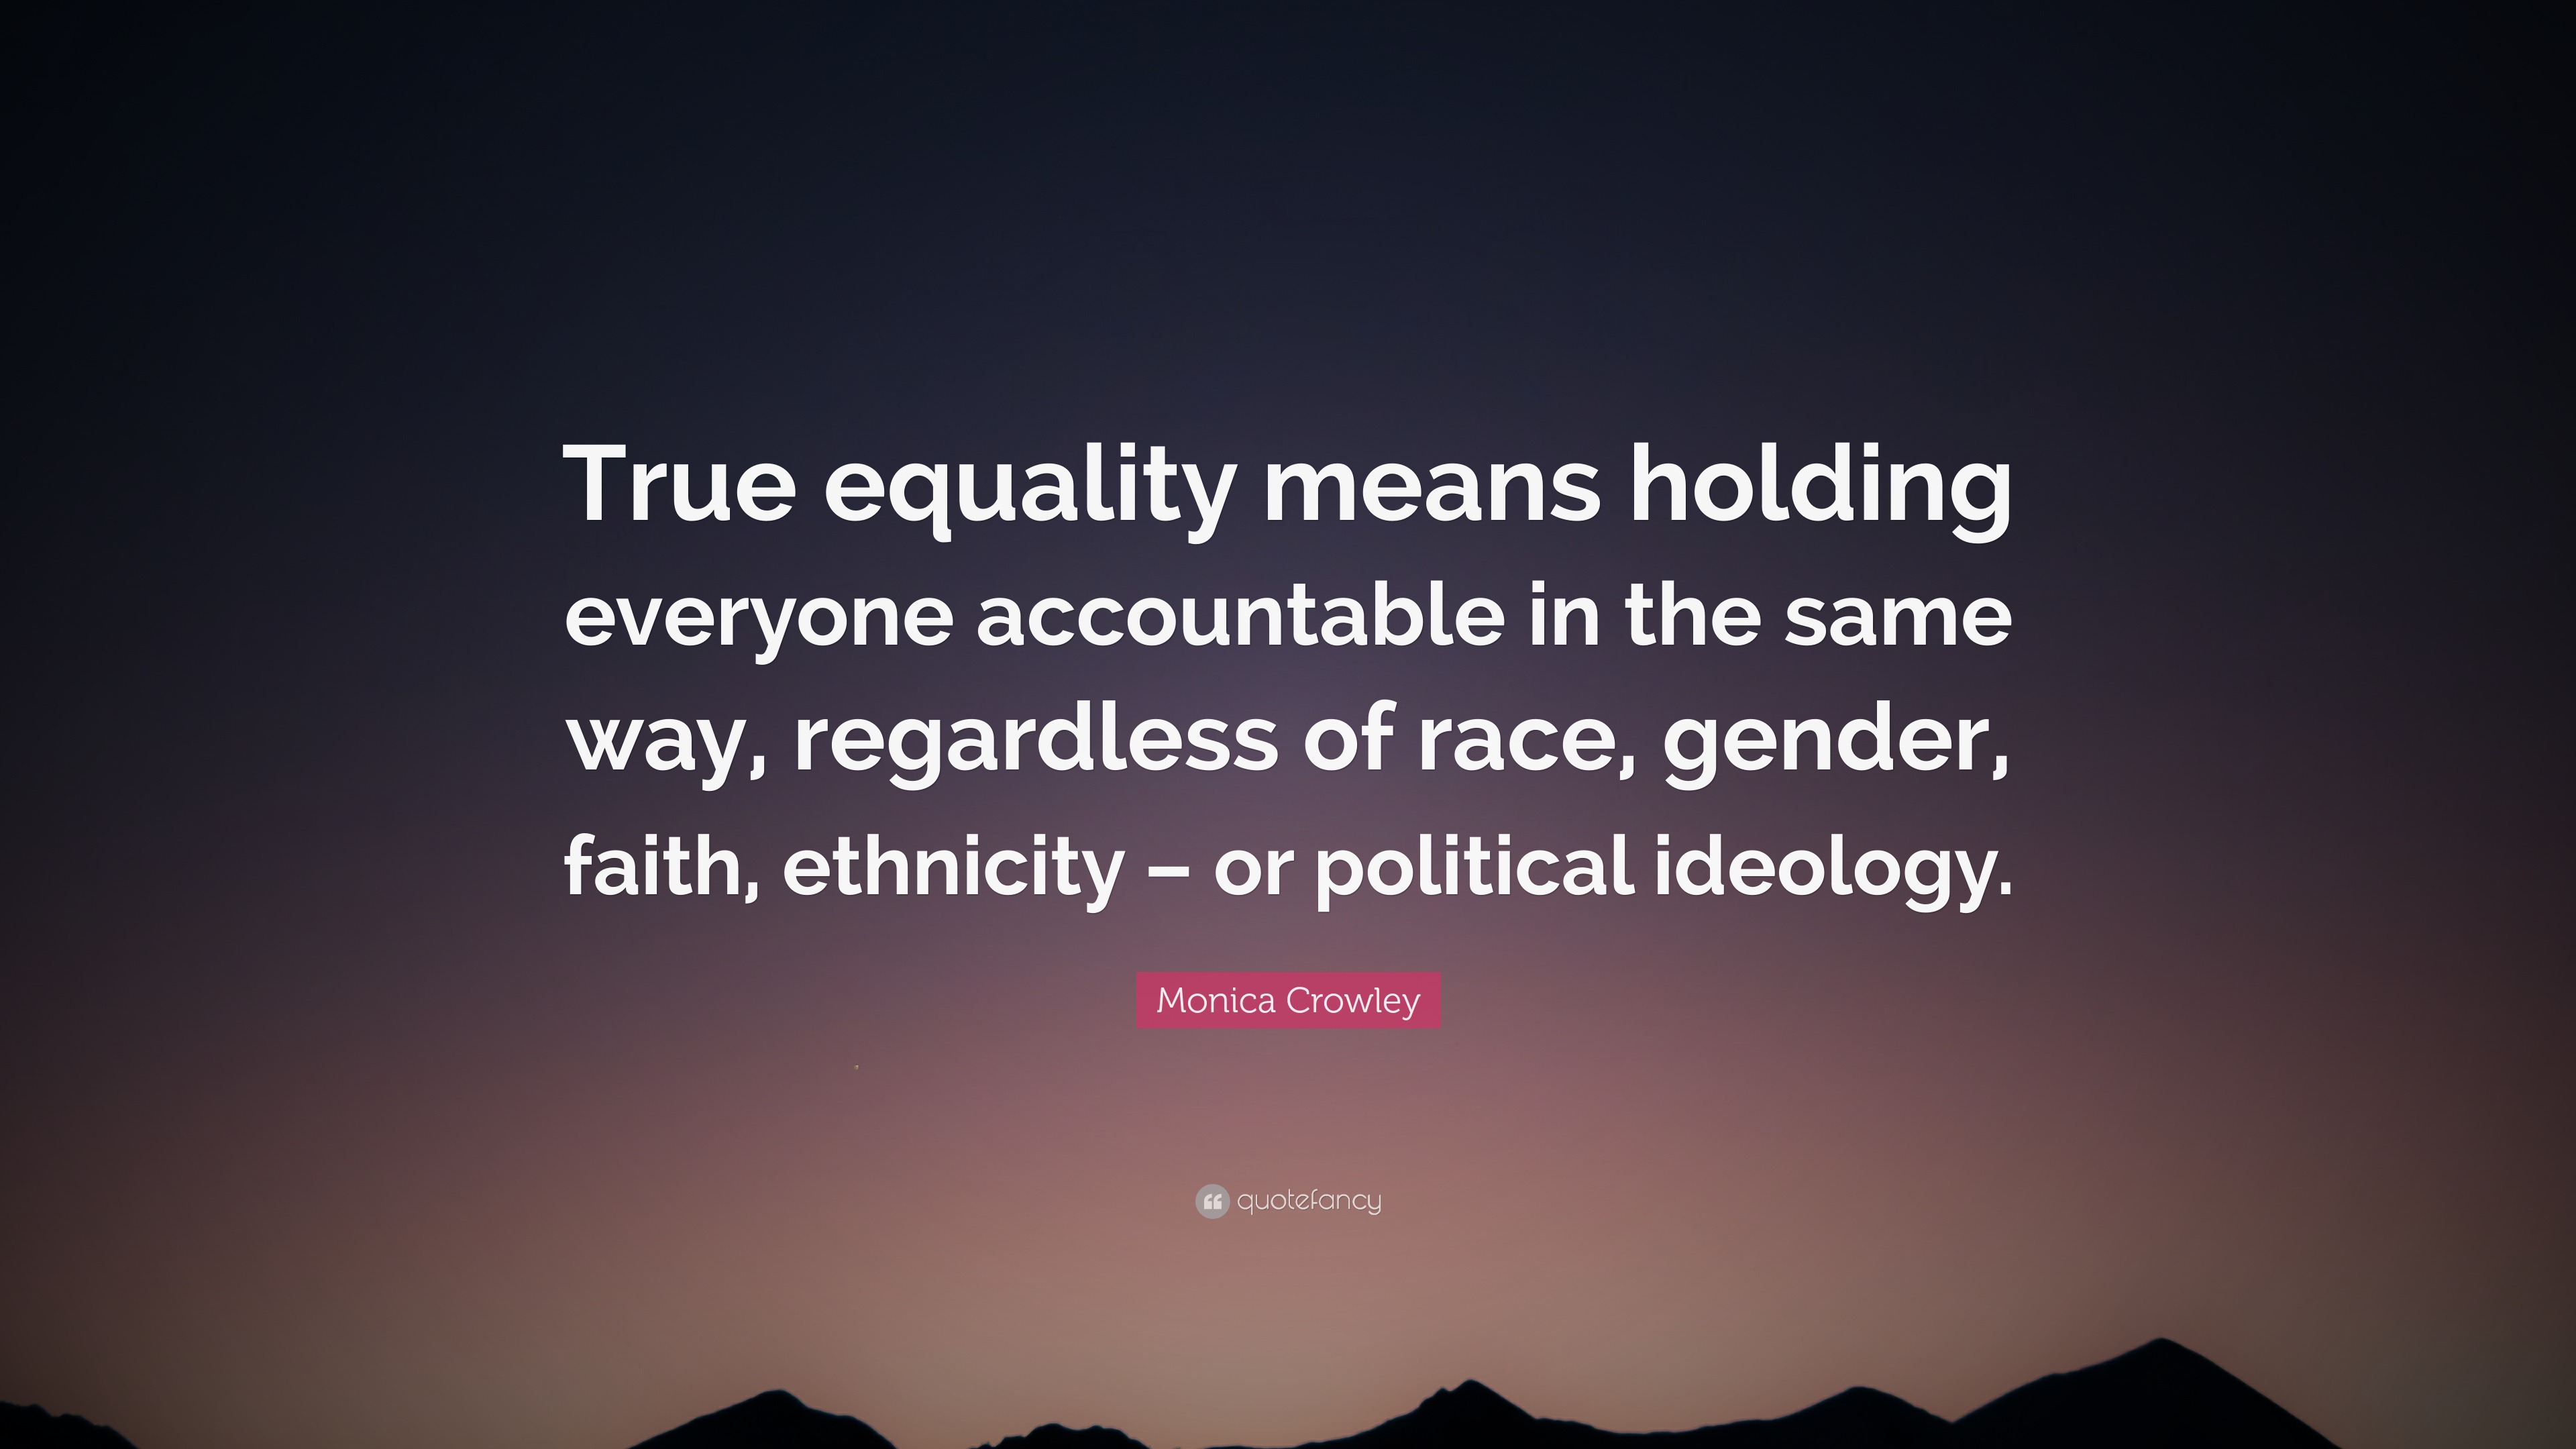 Monica Crowley Quote “True equality means holding